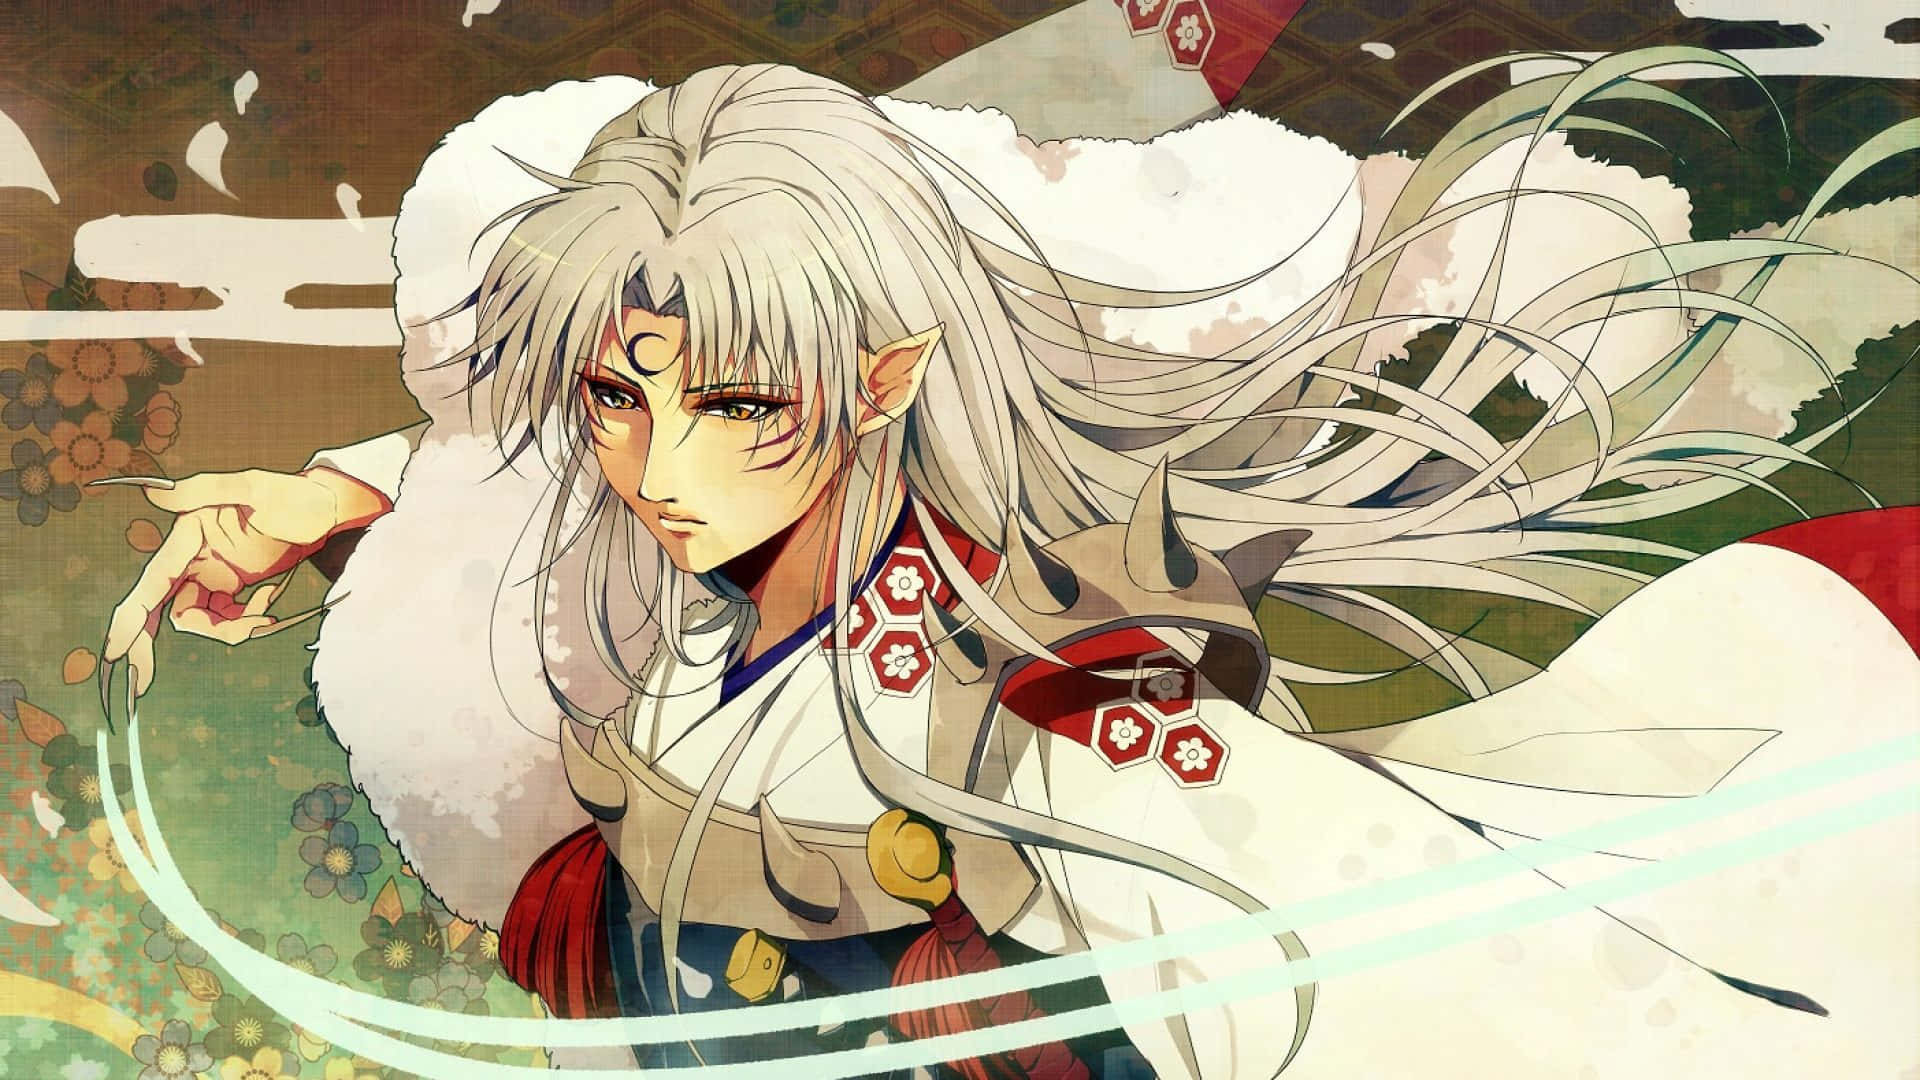 Sesshomaru, The Powerful Demon Lord, In A Battle Stance